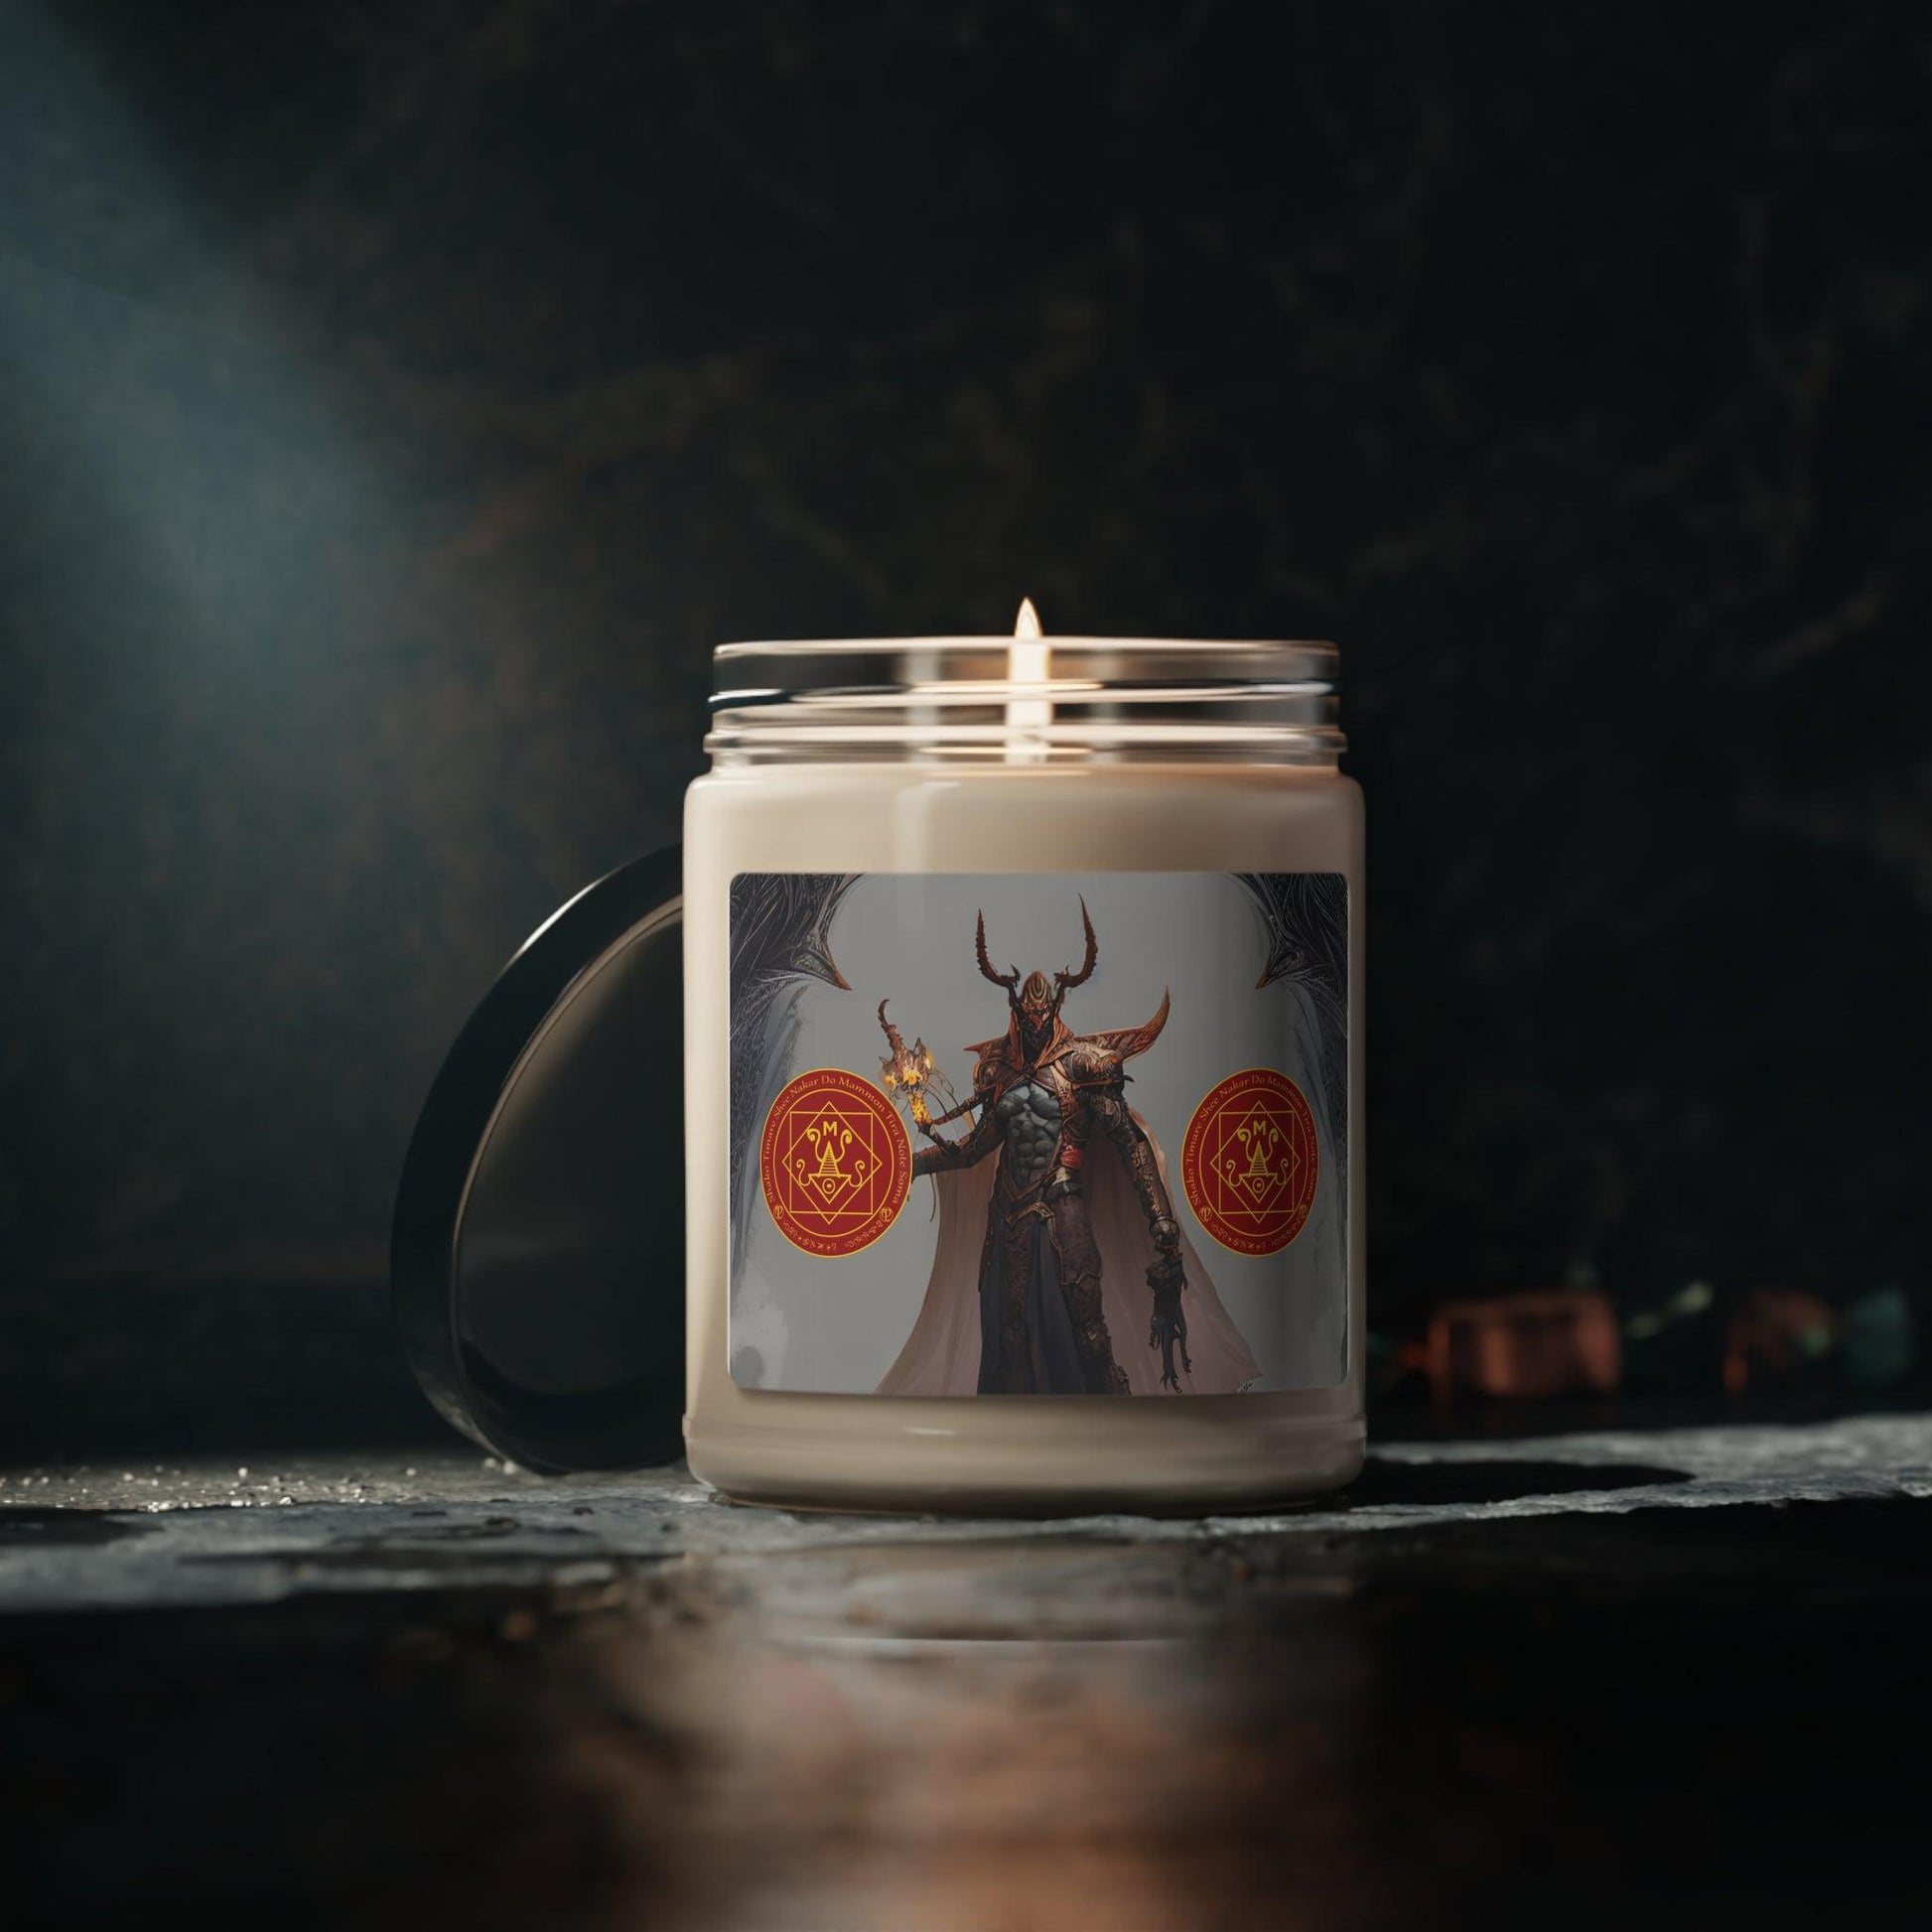 Demon-Mammon-Altar-Scented-Soy-Candle-for-Money-related-offerings-rituals-initiations-or-praying-and-meditation-20